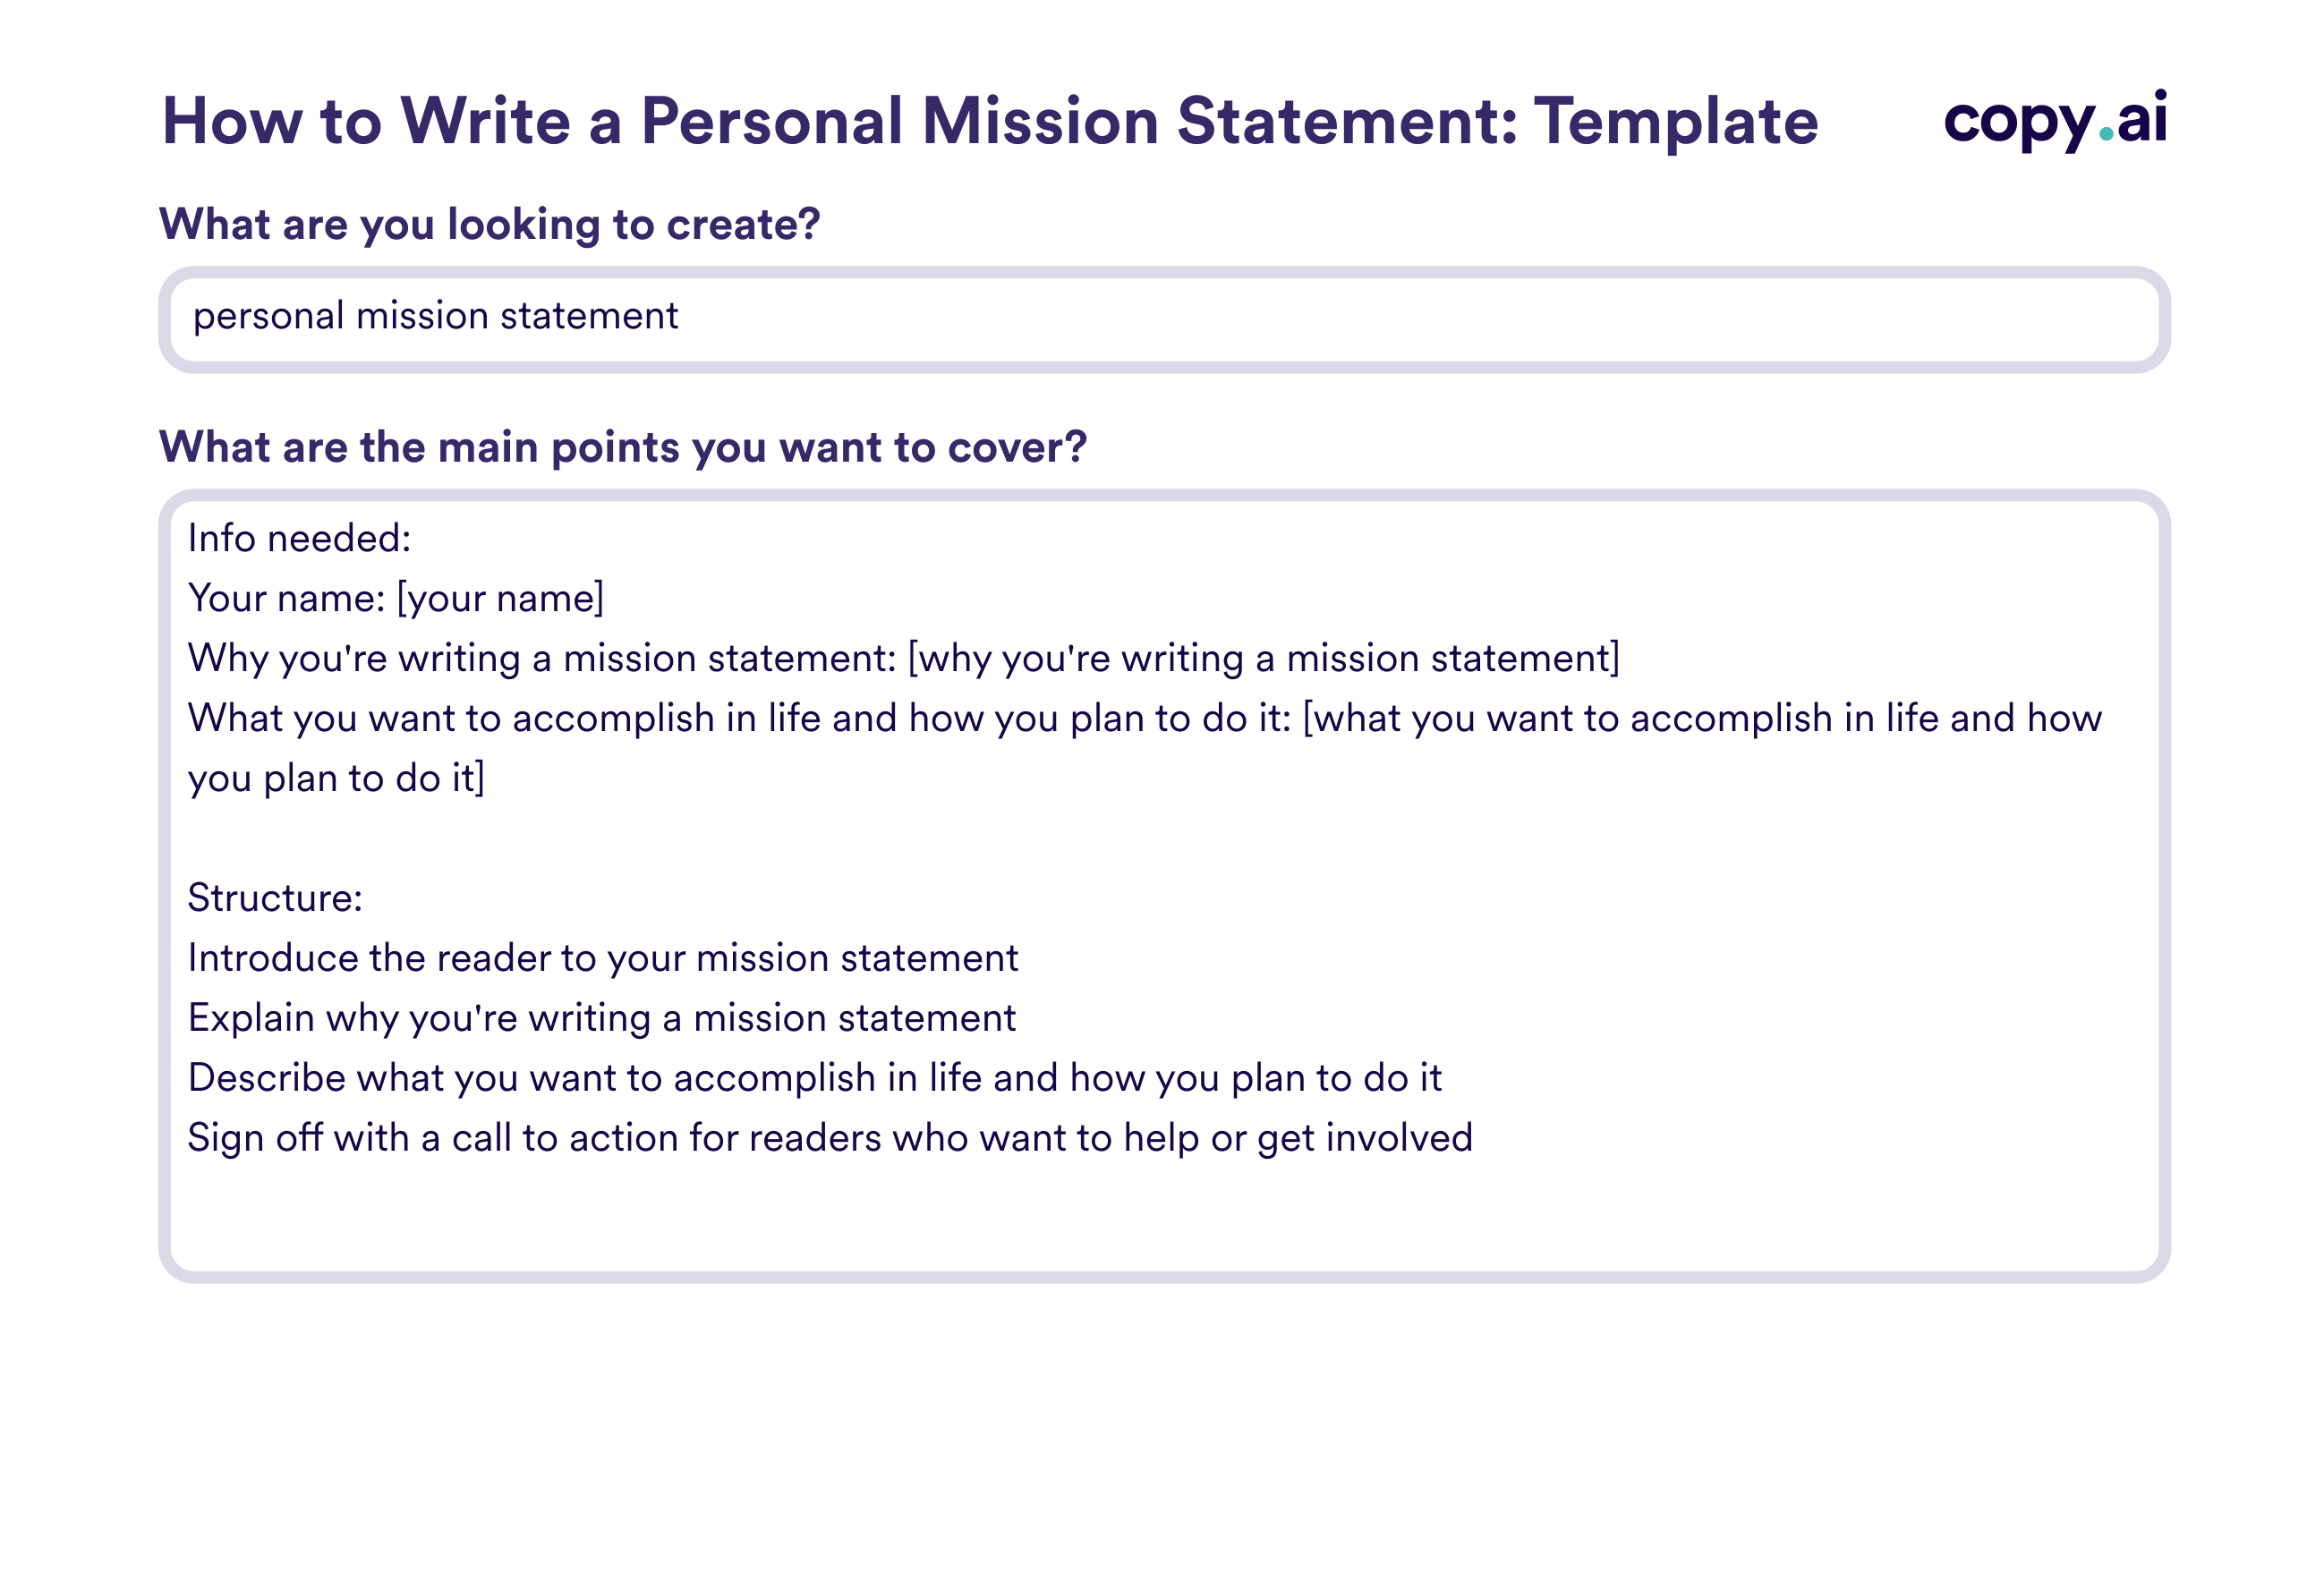 Writing A Short Story Template